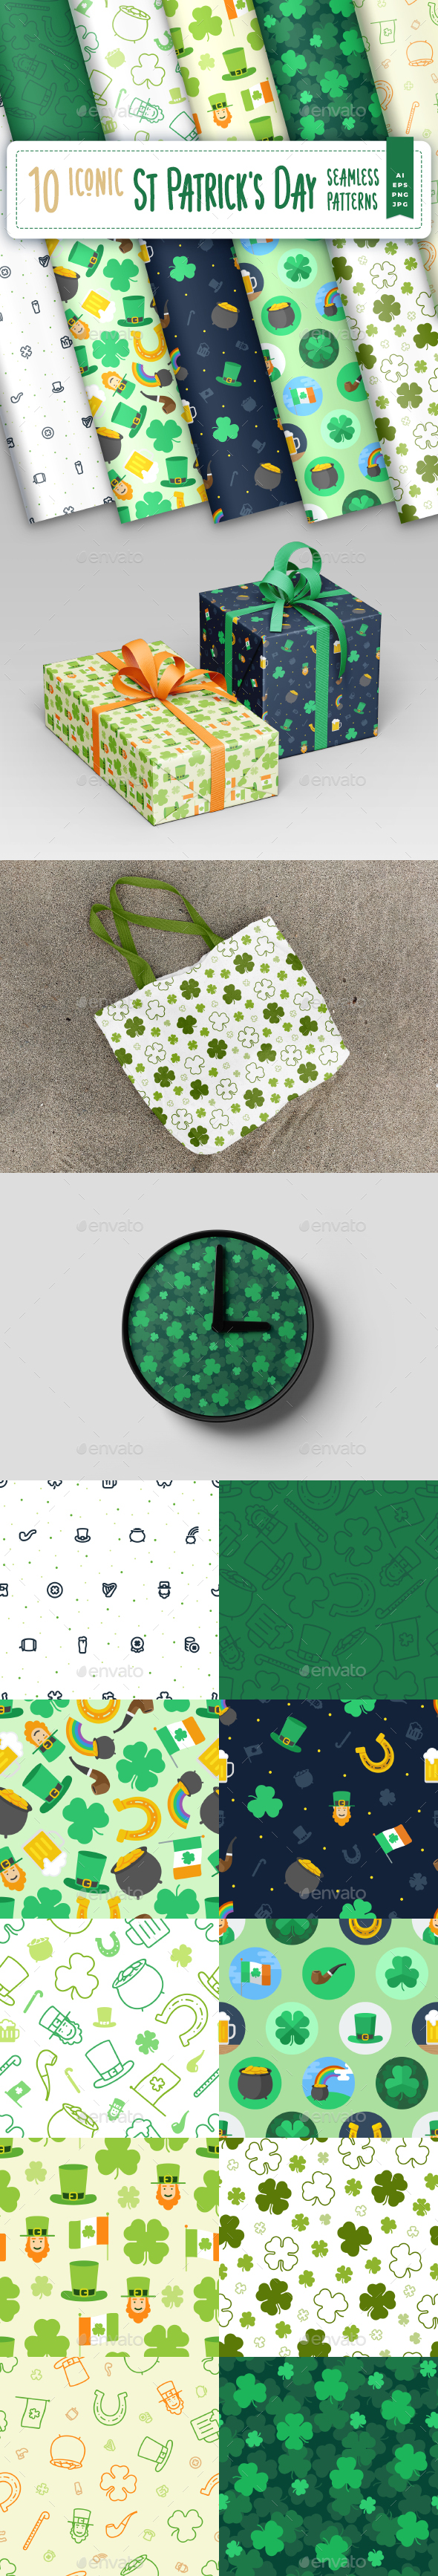 [DOWNLOAD]Iconic St. Patrick's Day Seamless Patterns